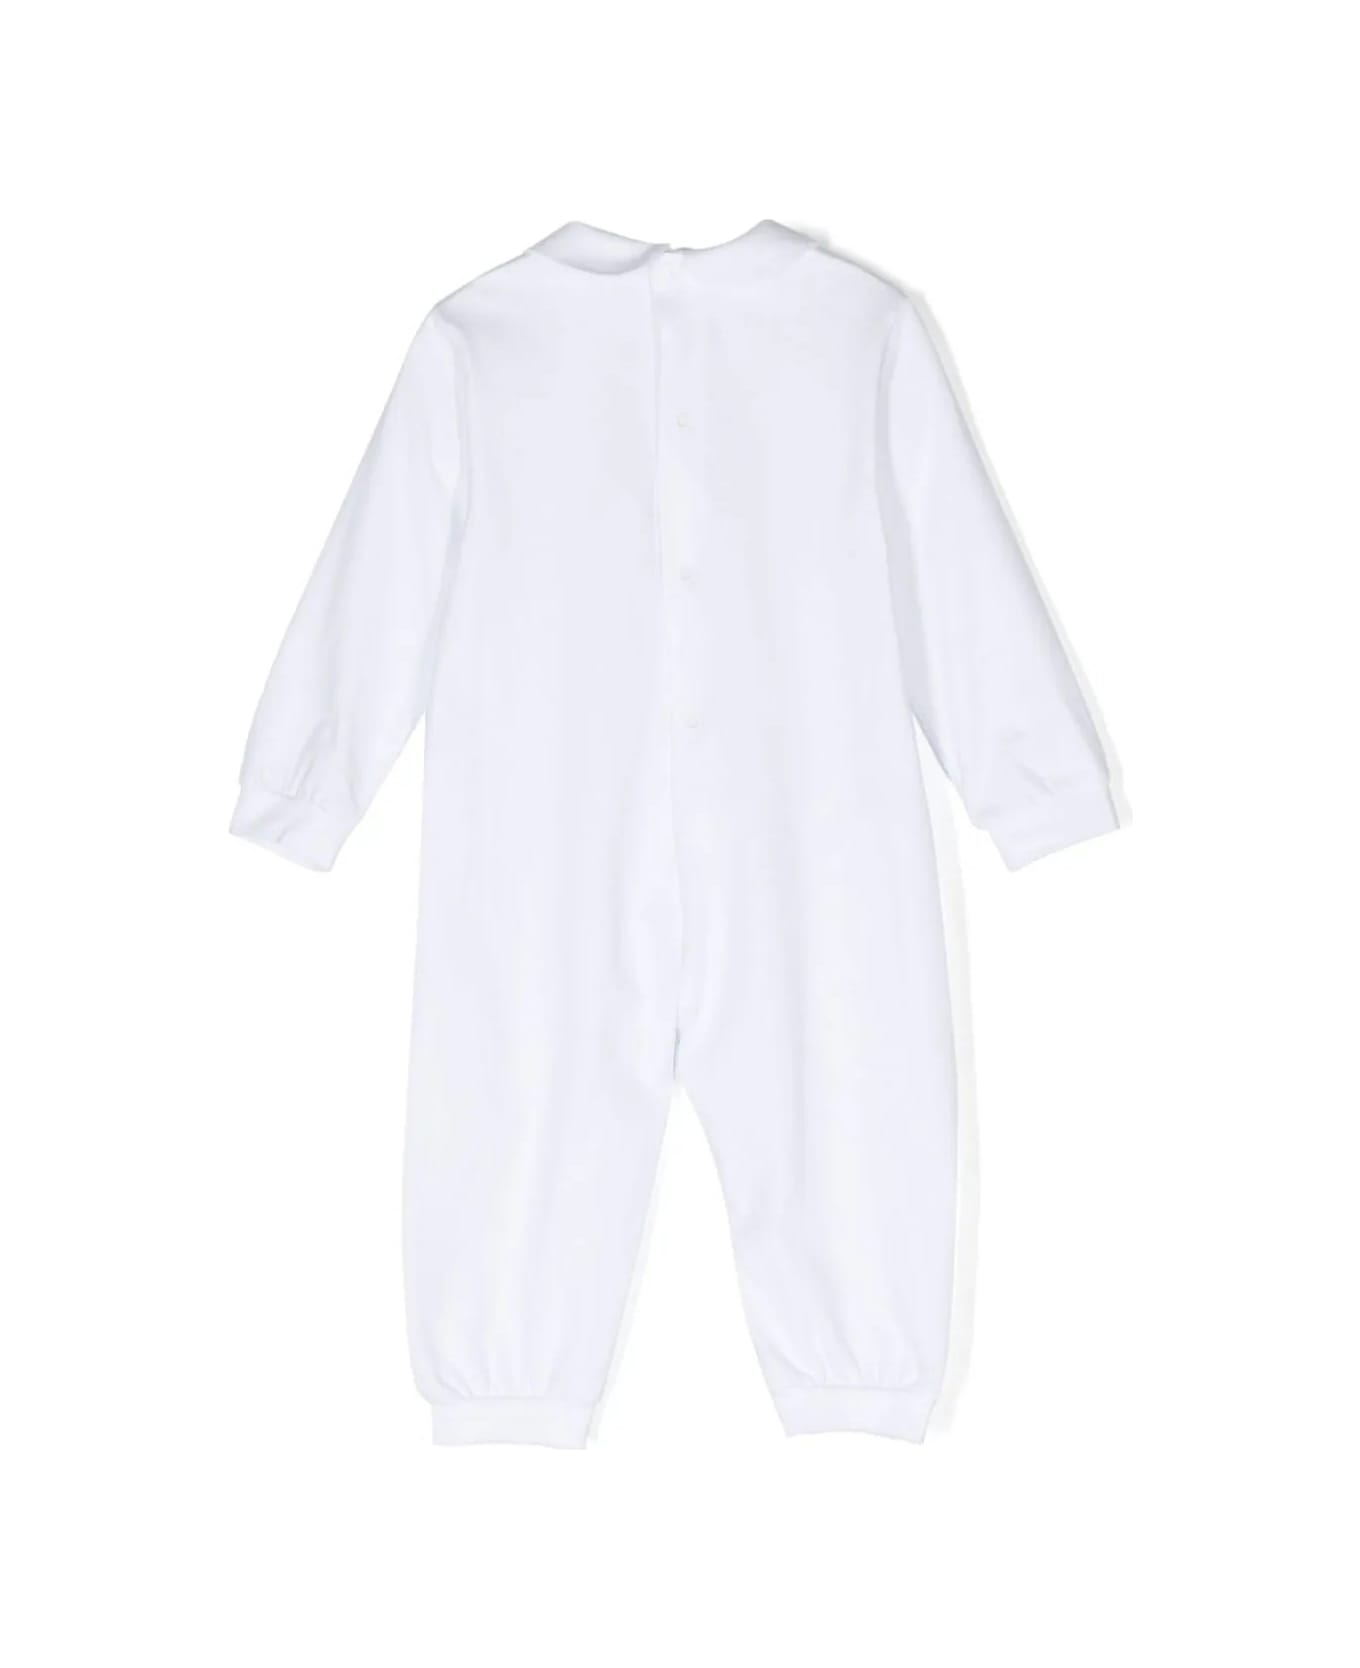 Il Gufo White Stretch Jersey Playsuit With Rabbit Motif - White